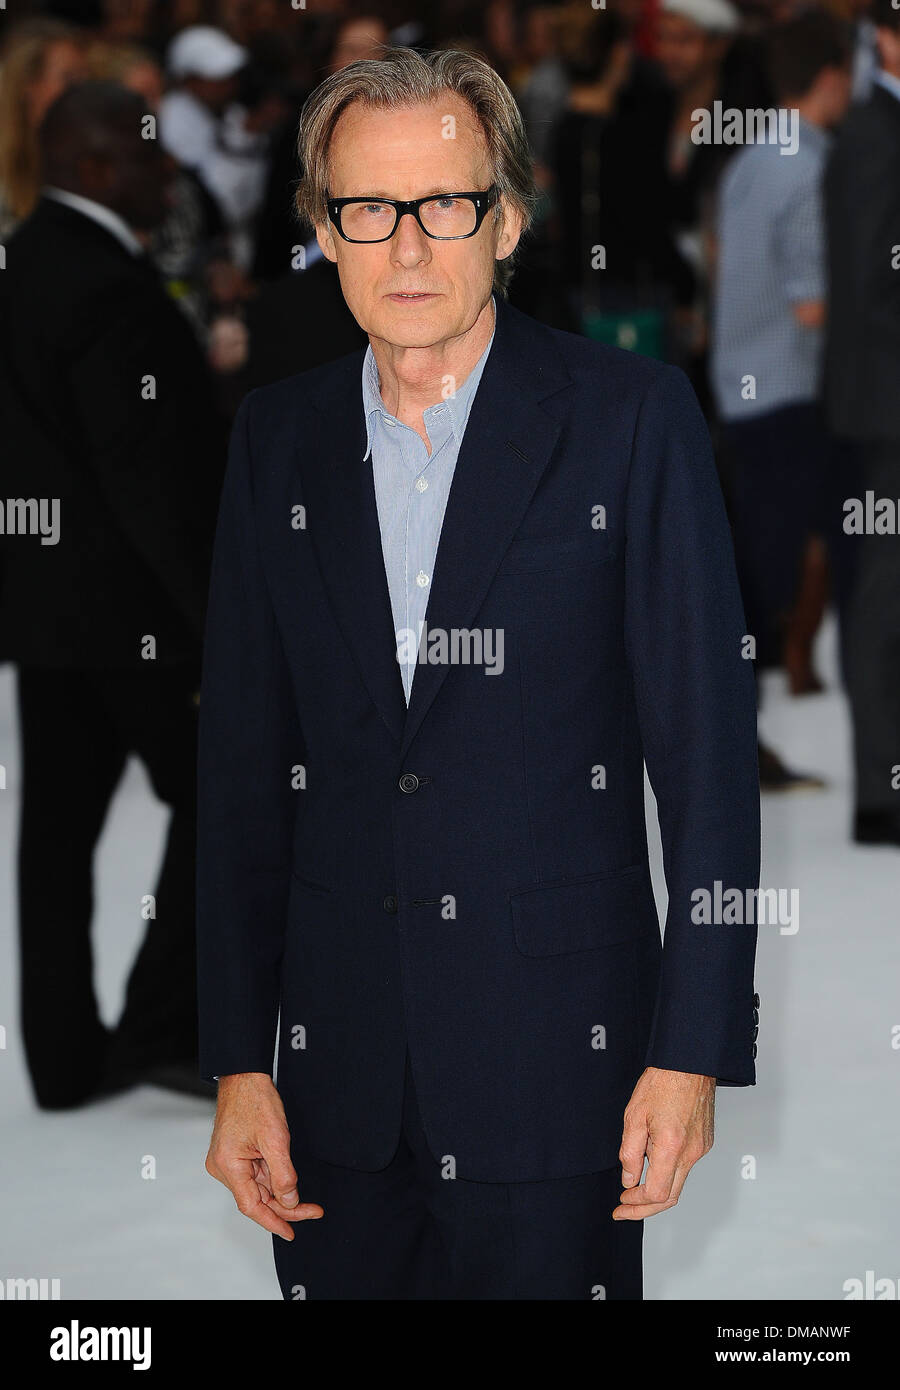 Bill Nighy London premiere of 'Total Recall' held at Vue Leicester Square - Arrivals London England - 16.08.12 Stock Photo